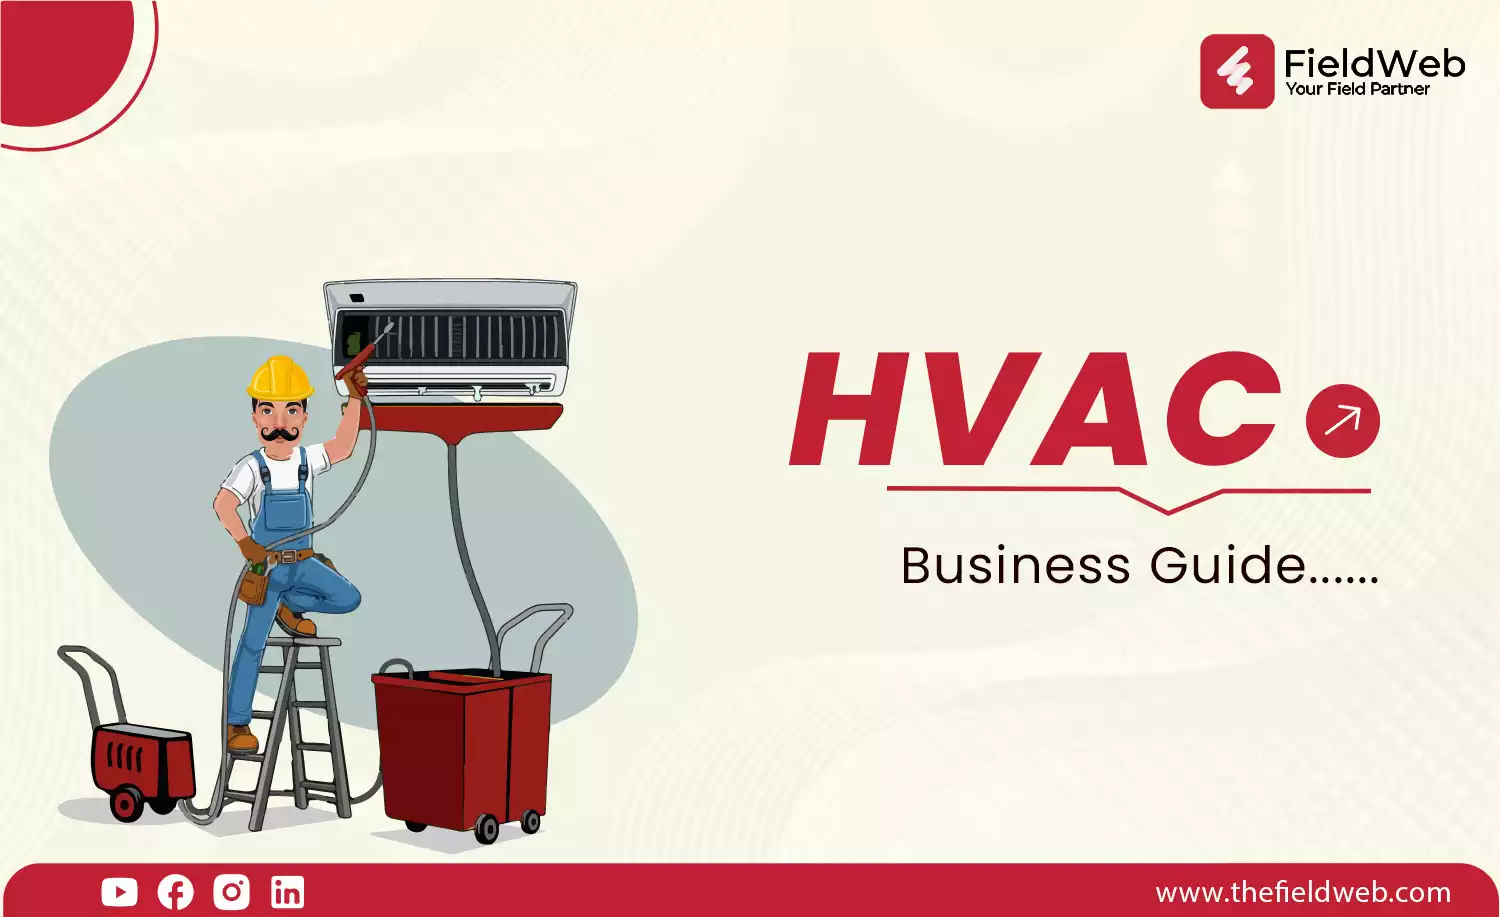 image is displaying hvac business software